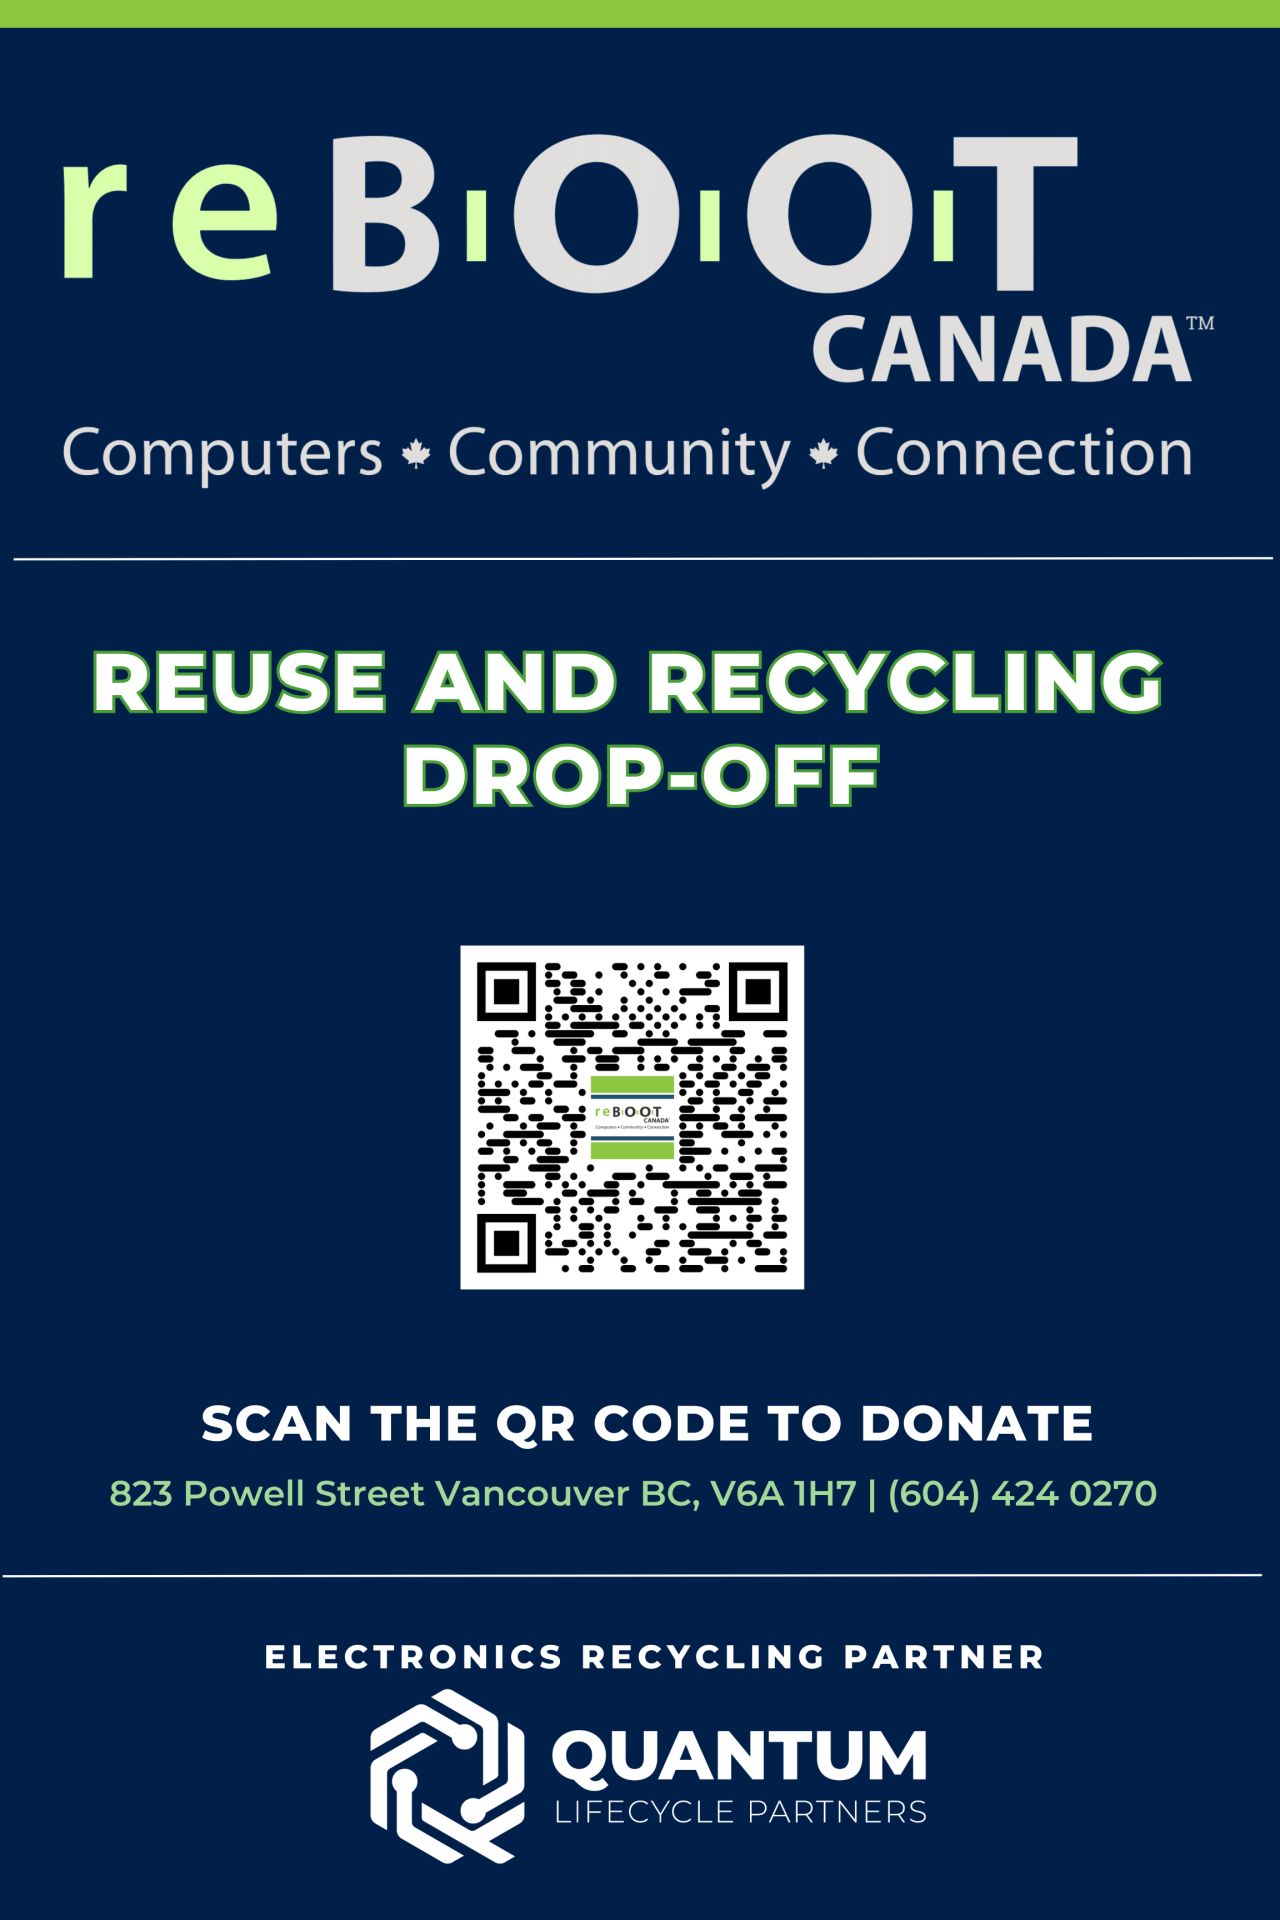 QR code poster encouraging donations to reBOOT Canada as part of the City of Vancouver's Reuse and Recycling Drop-Off events